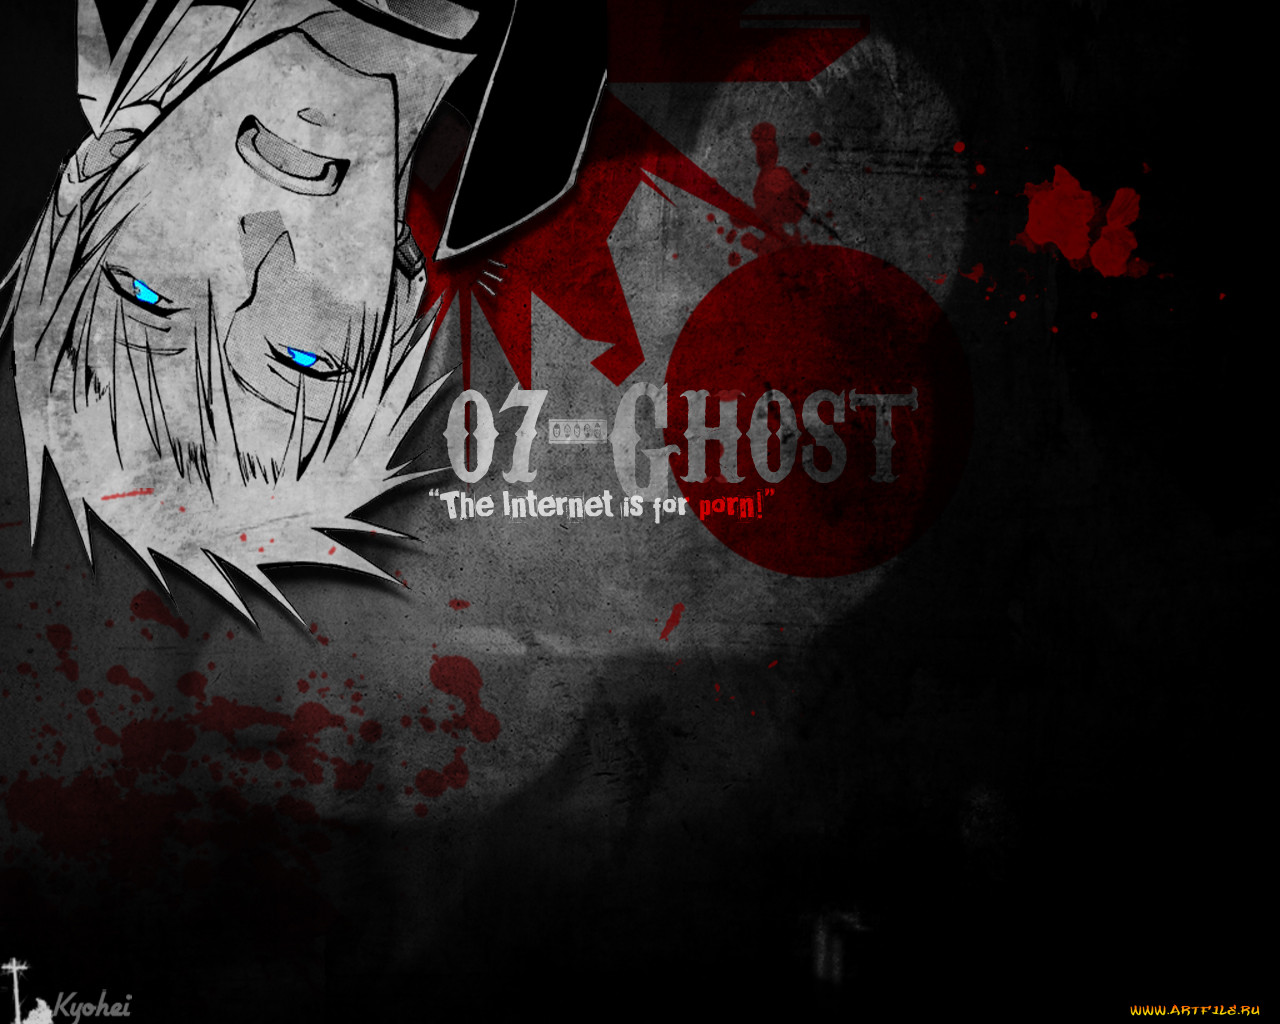 , 07, ghost